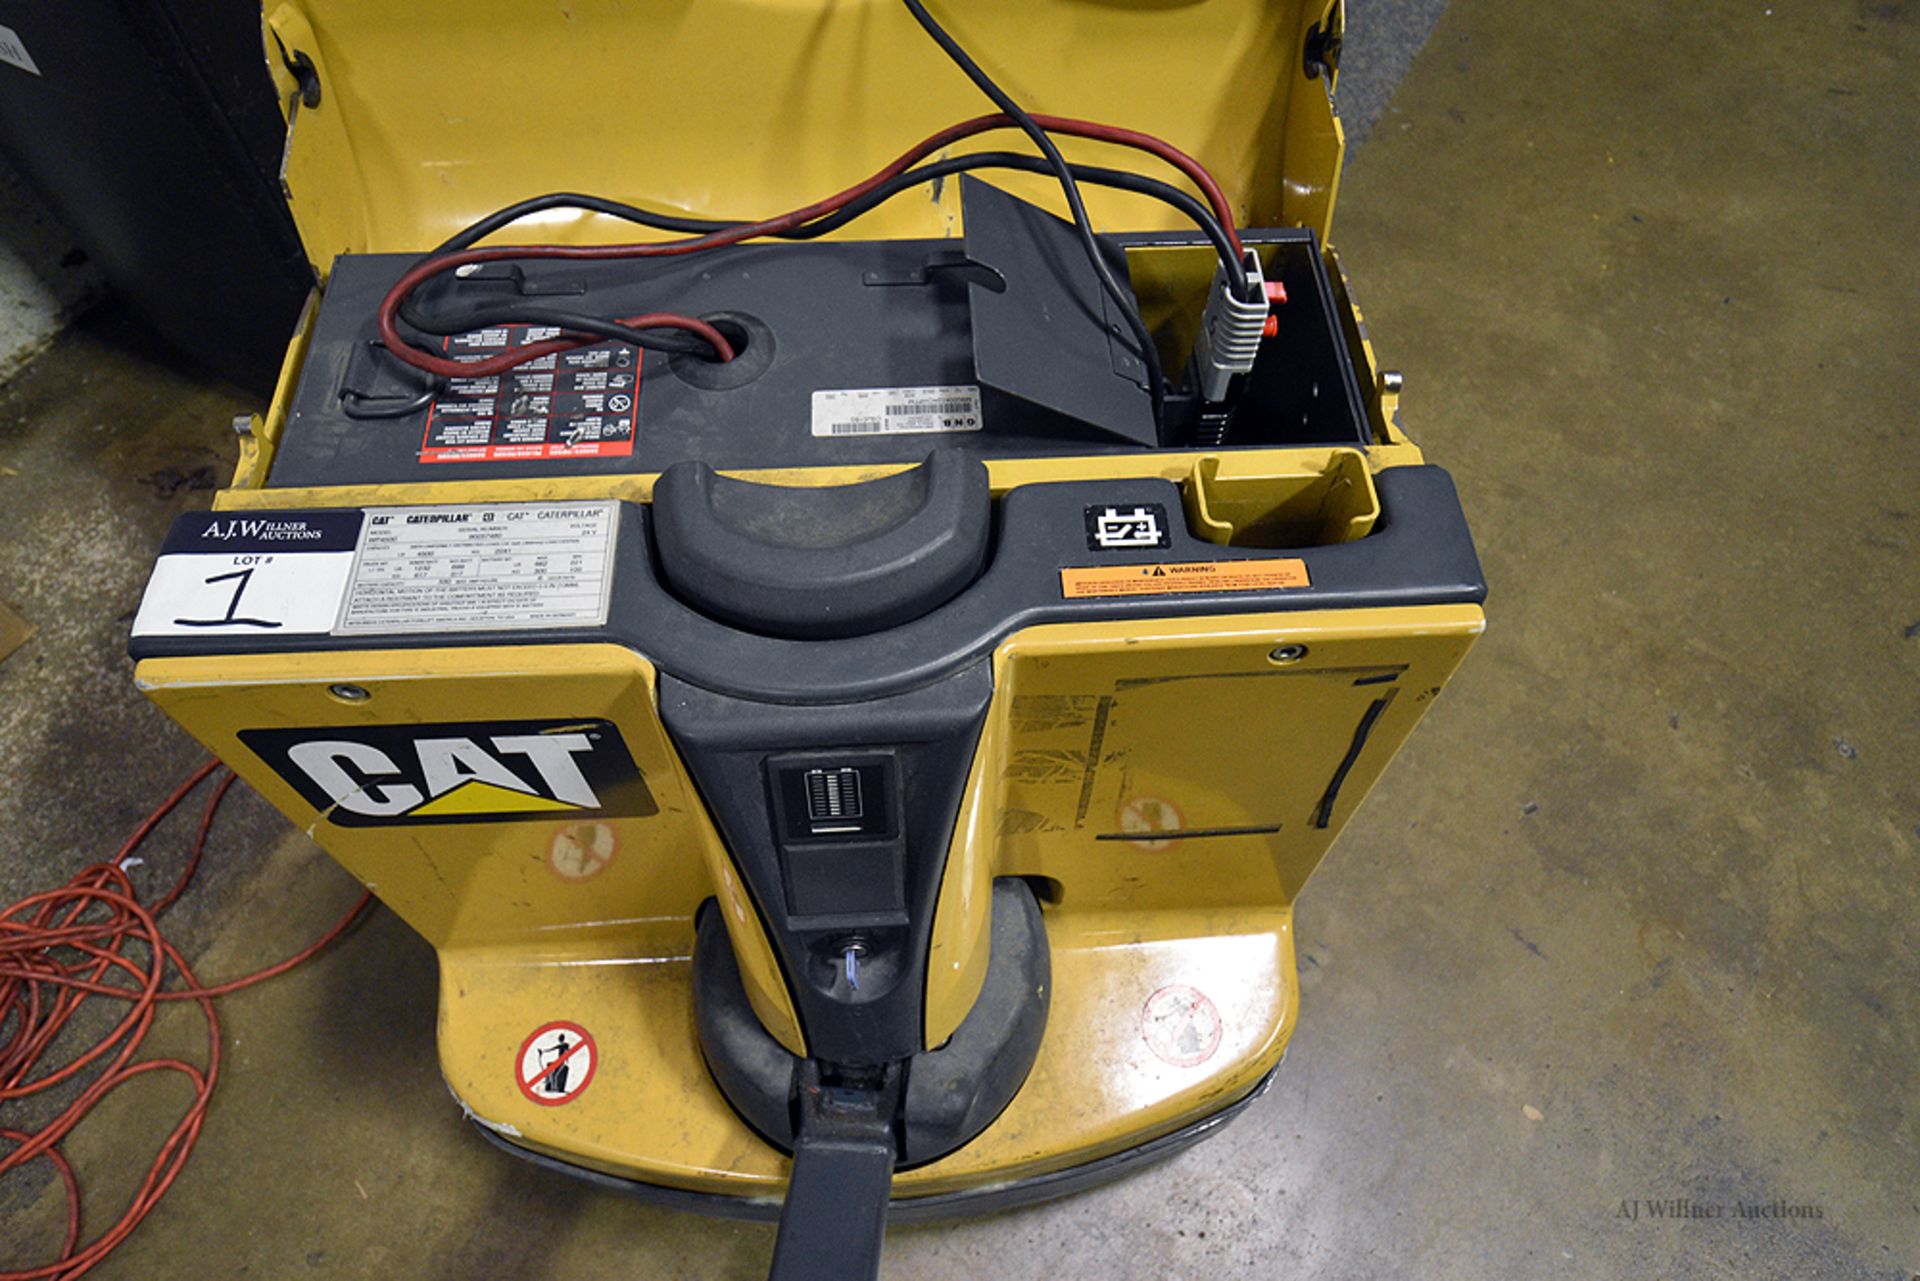 Caterpillar Model: WP Electrivc Pallet Jack s/n 90257480 (non-operational) - Image 3 of 6